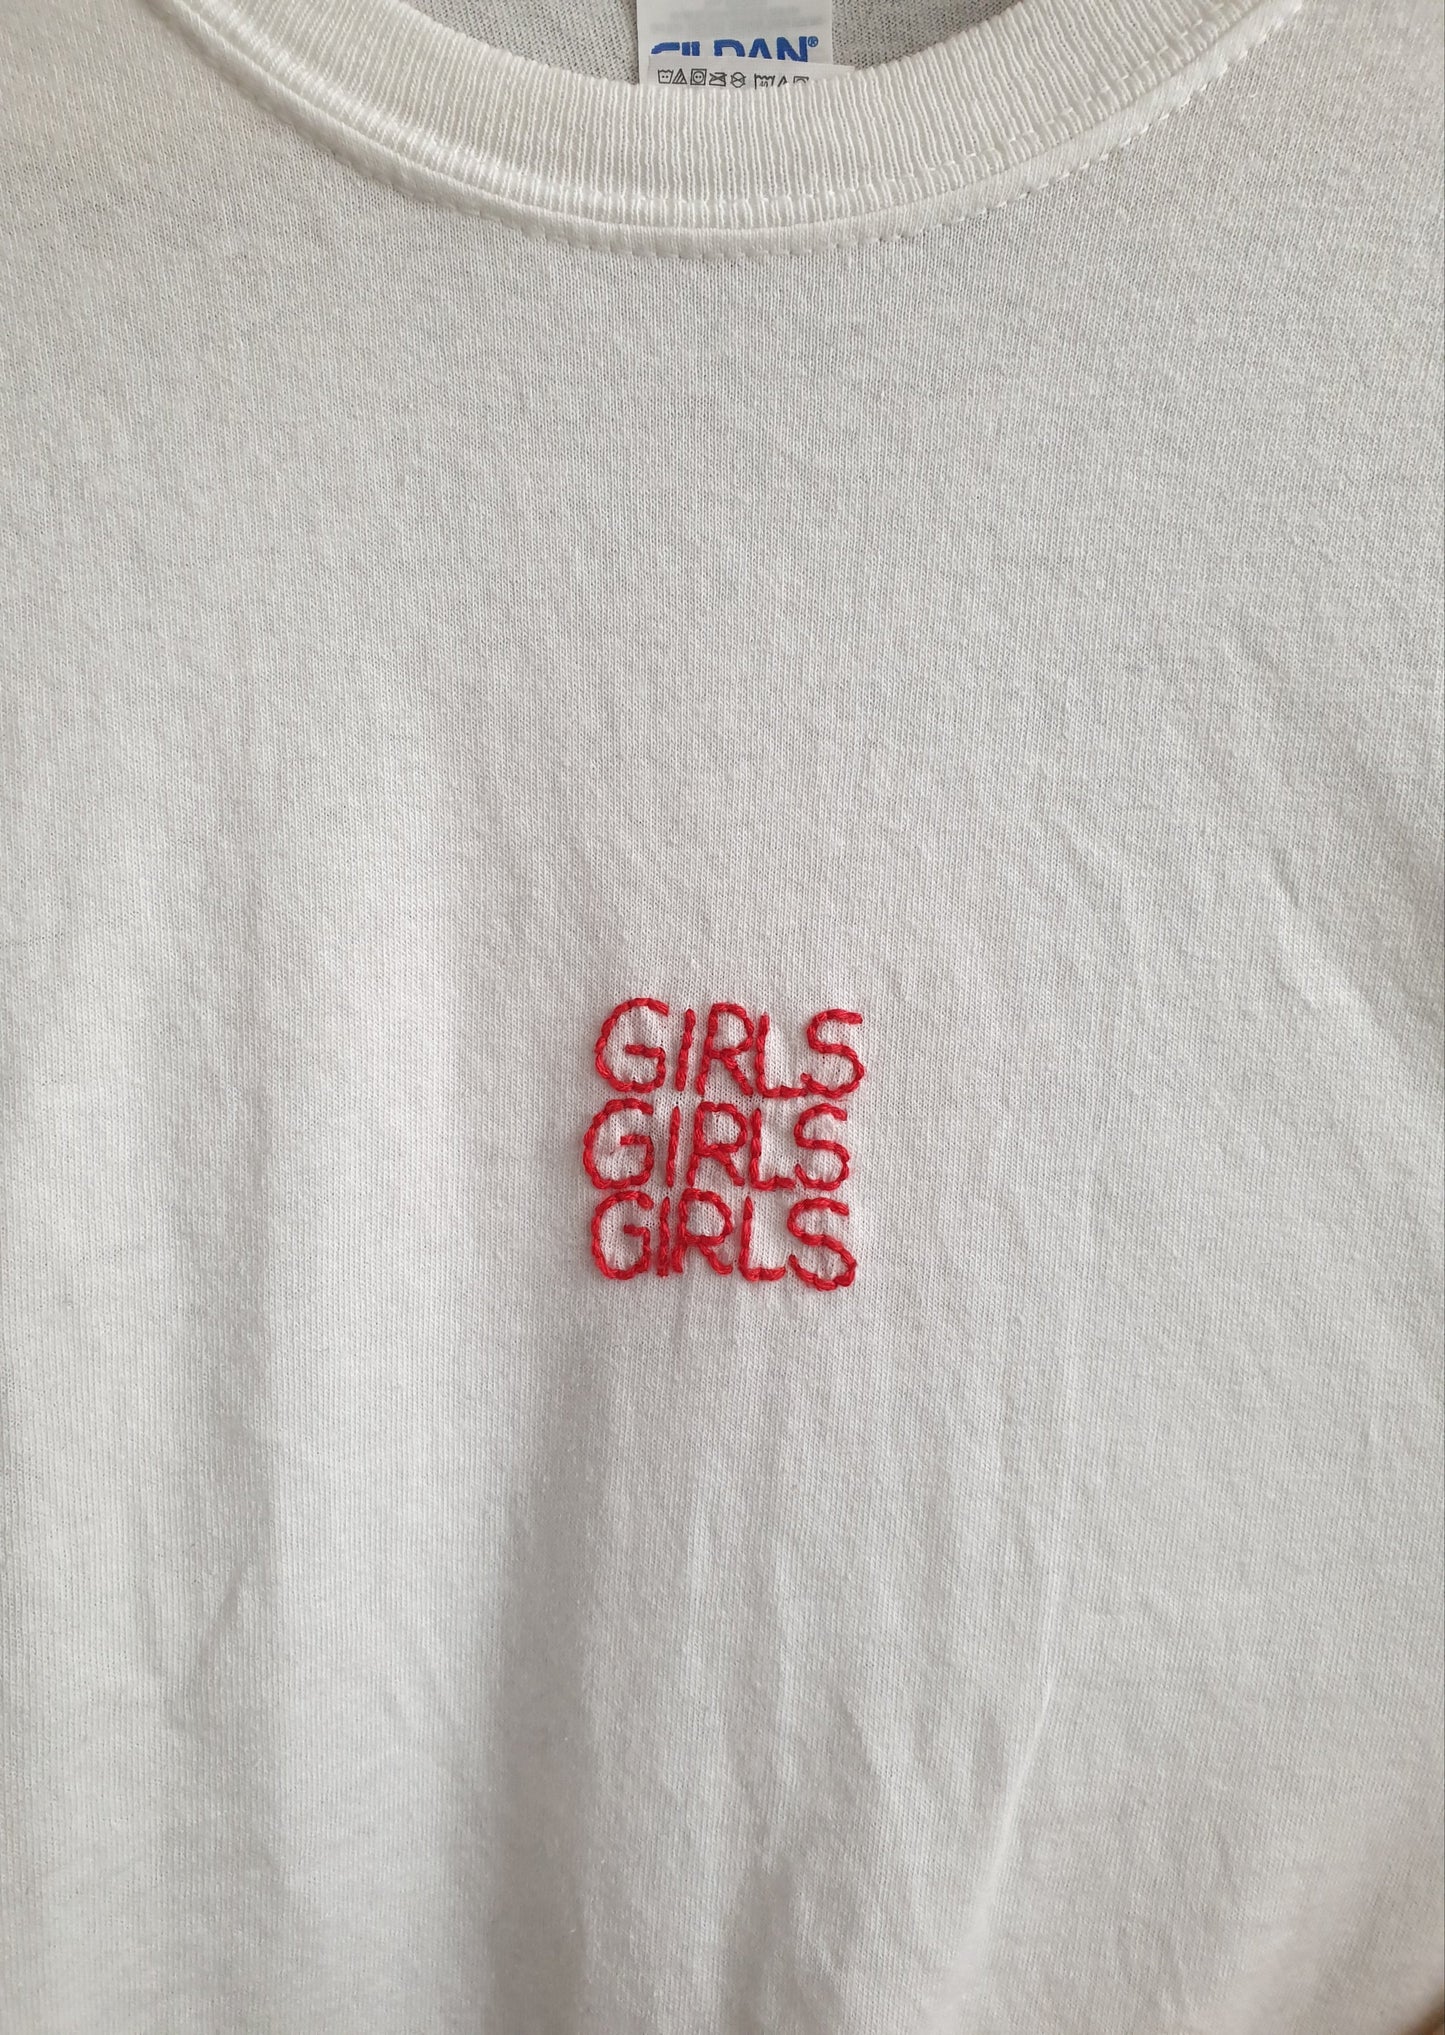 Hand Embroidered Girls Shirt -  Spacy Shirts